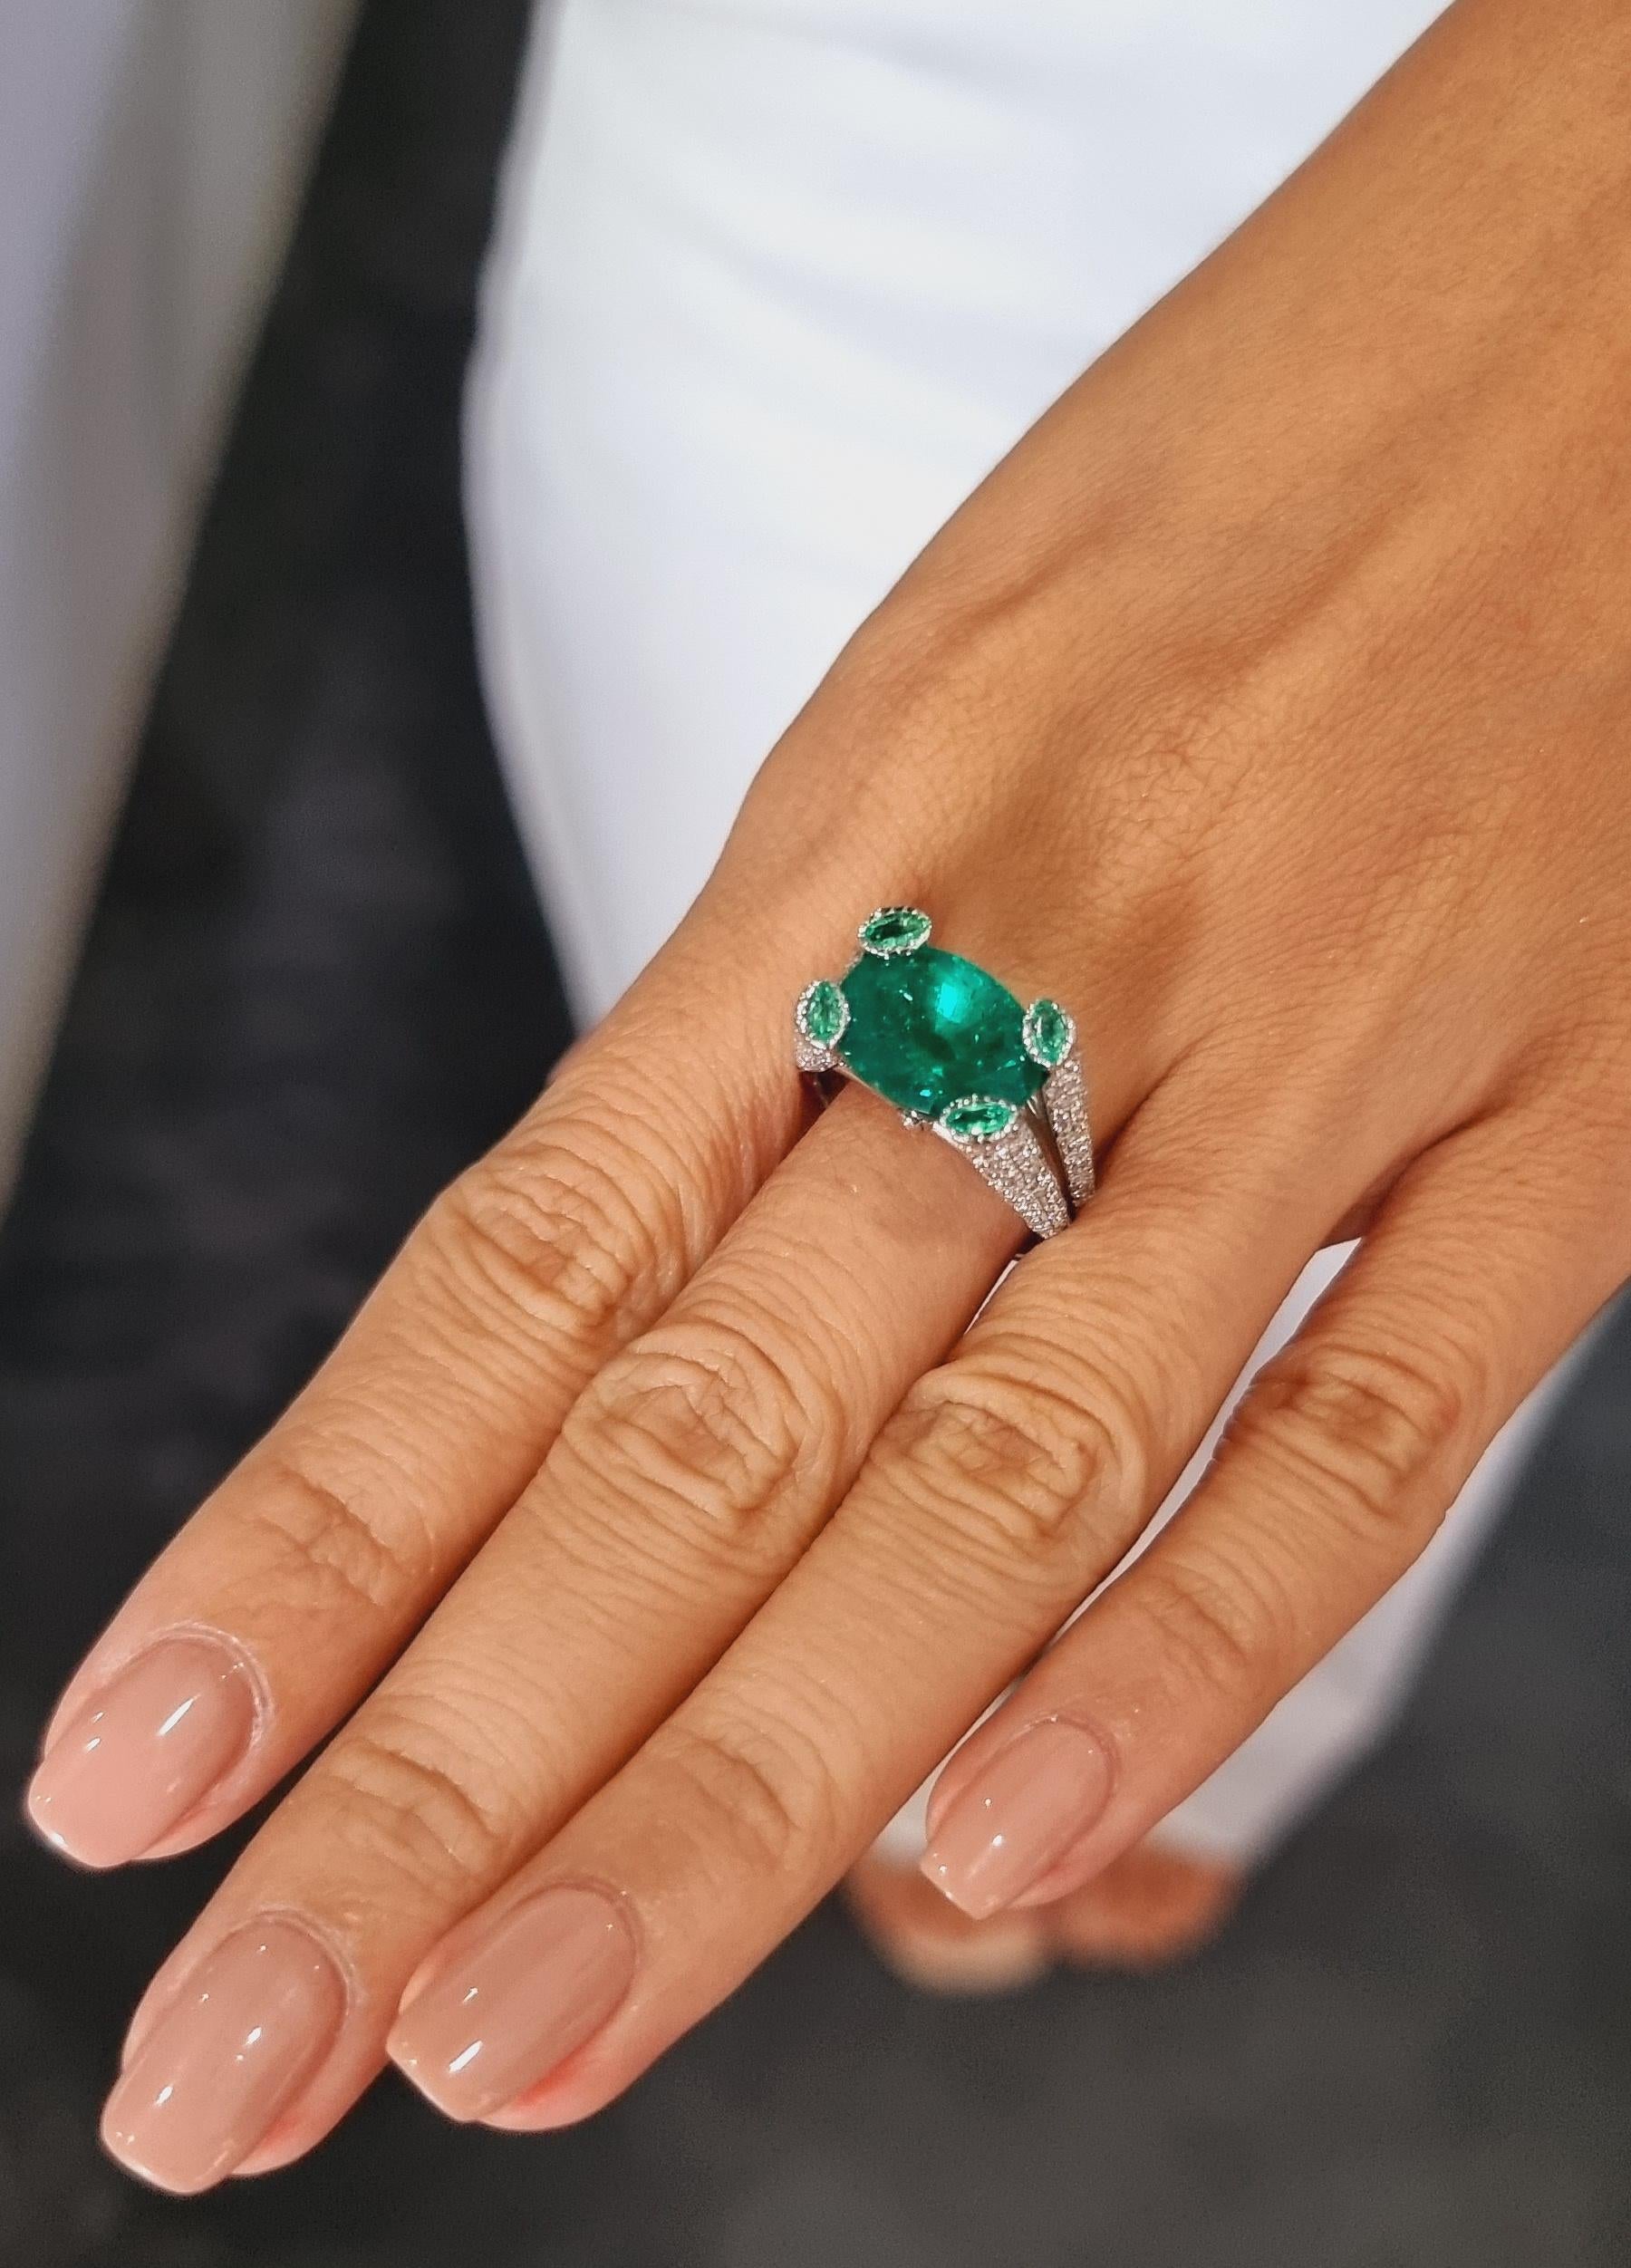 A truly special kind of a ring.

Presenting an exquisite masterpiece, a truly unique and opulent ring adorned with a certified 5.50-carat oval Colombian emerald of unparalleled quality, certified by GRS. This captivating gem, possessing a rich and